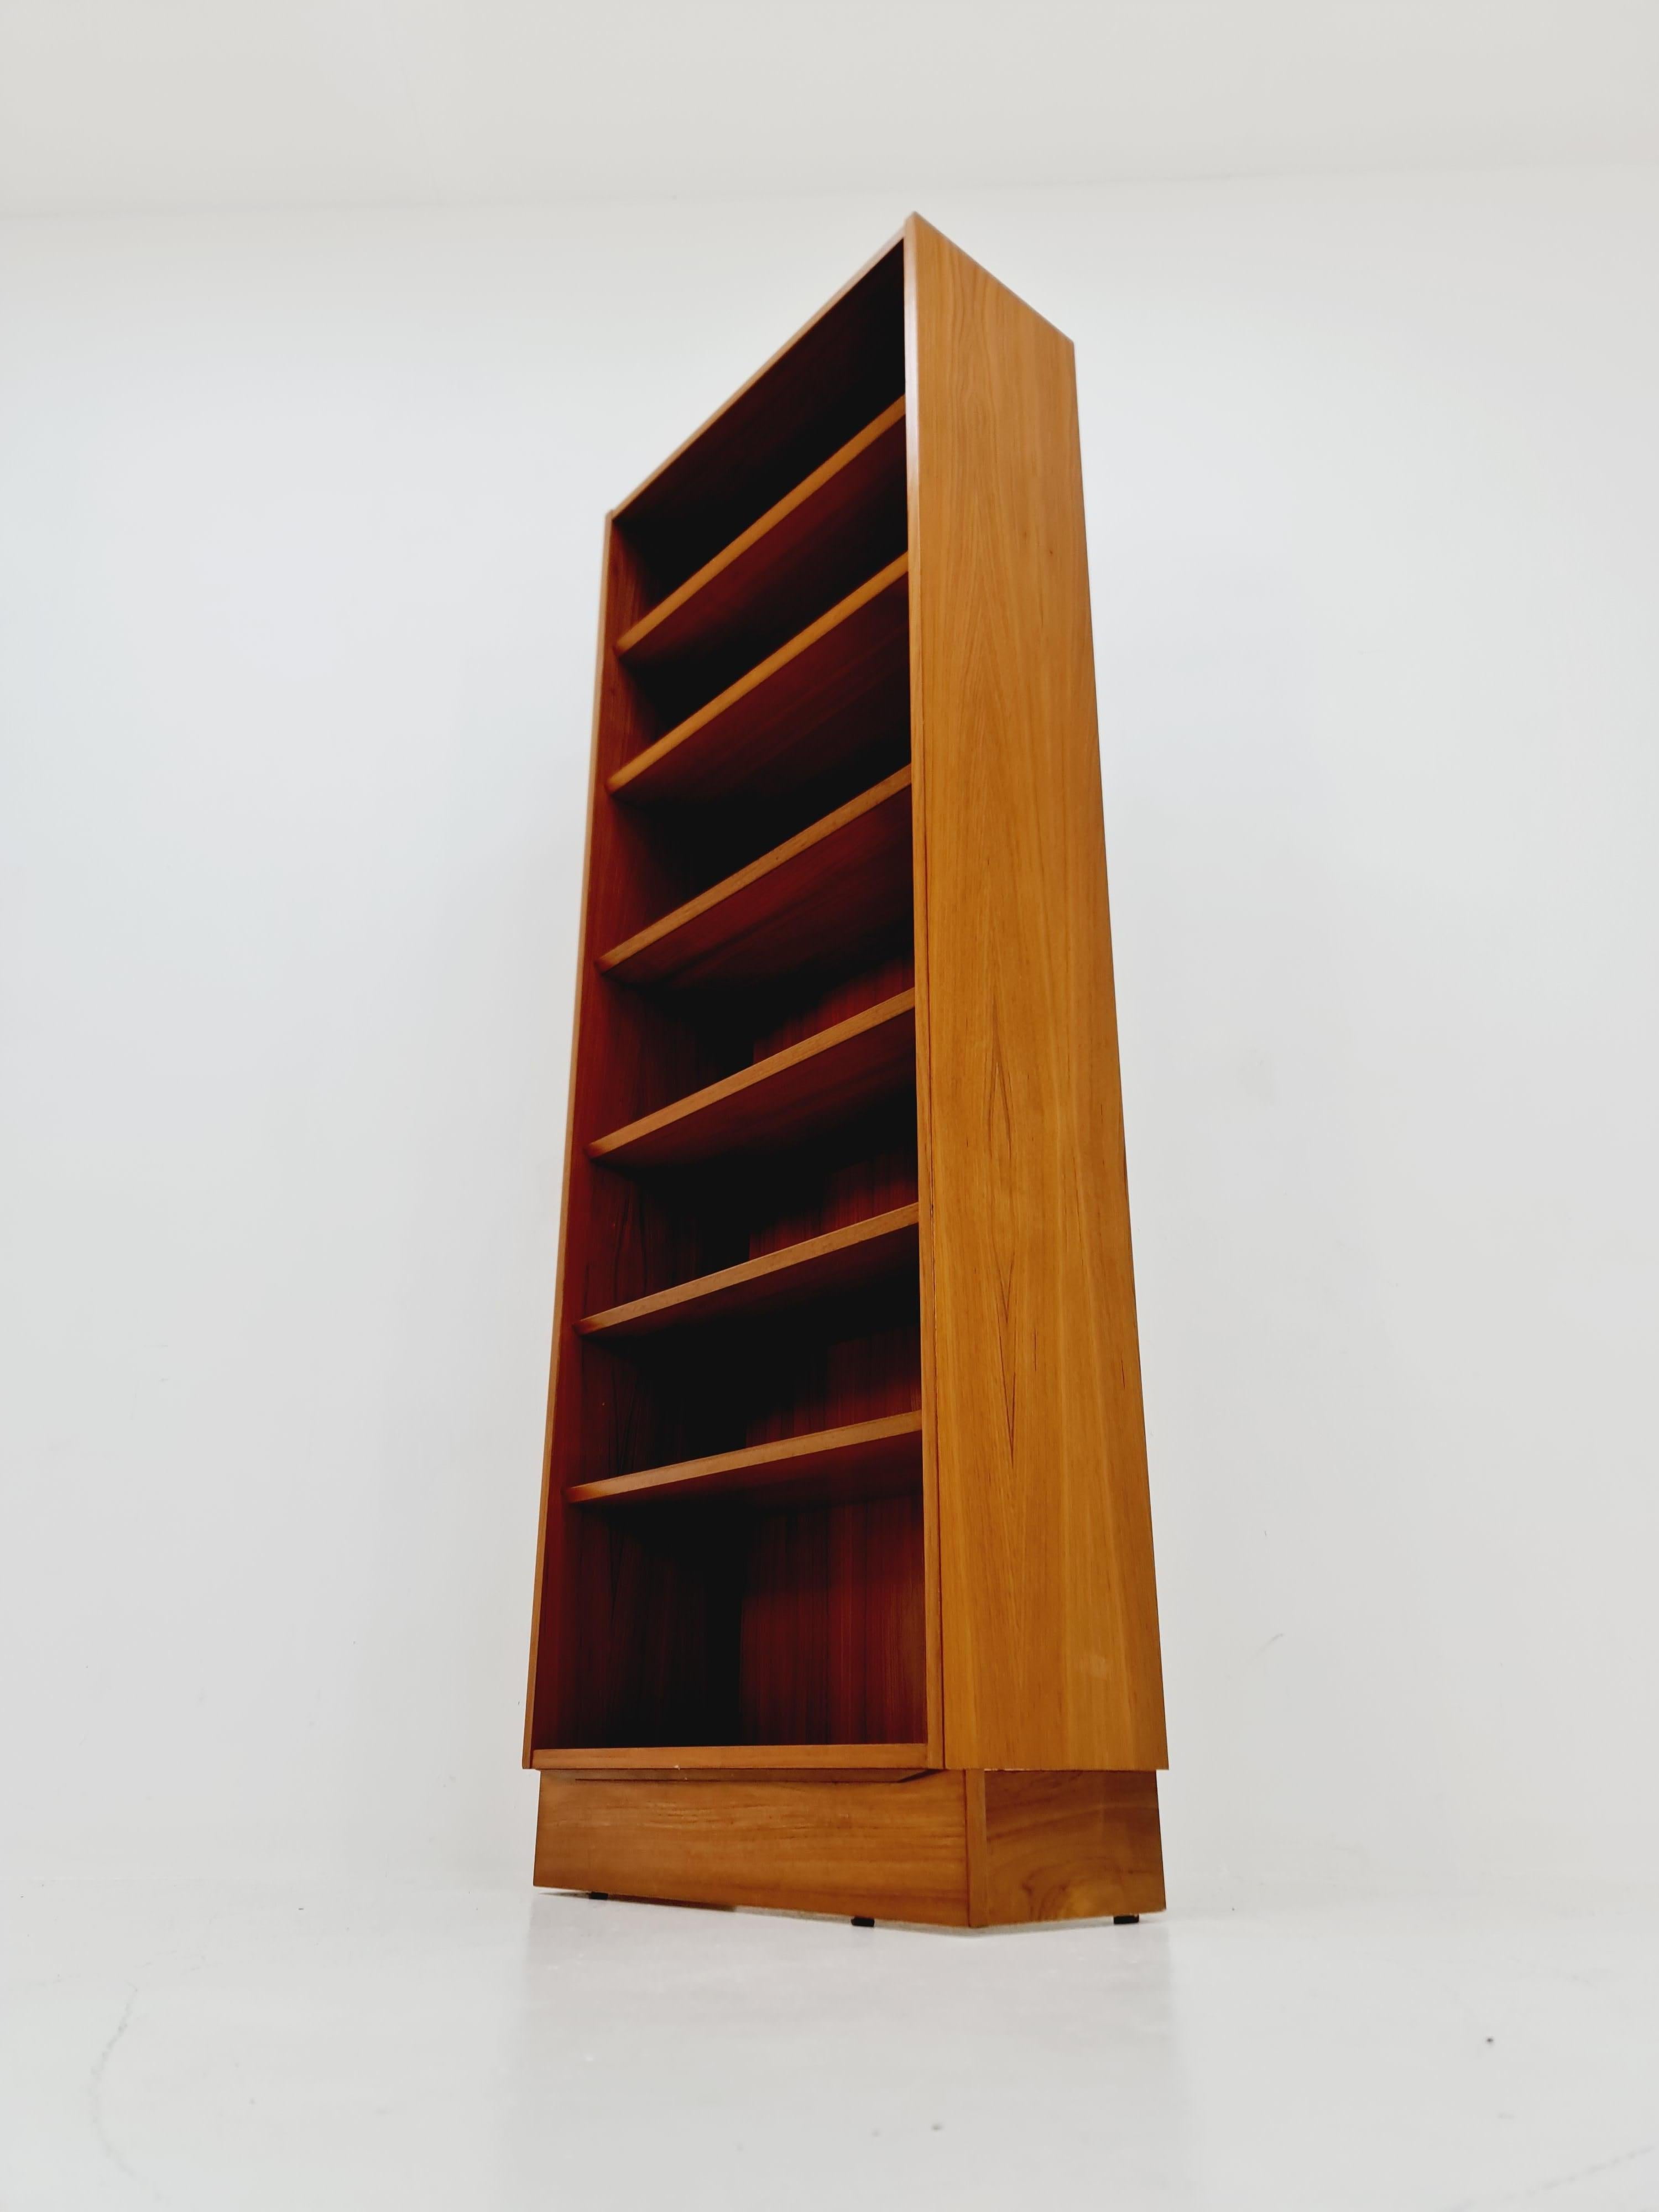 Danish freestanding vintage bookshelf system/ book case teak by Hundevad , 1960s

Dimensions:
Height: 195 cm
Width: 70 cm 
Depth: 31   cm


It is in good vintage condition, however, as with all vintage items some minor wear marks should be